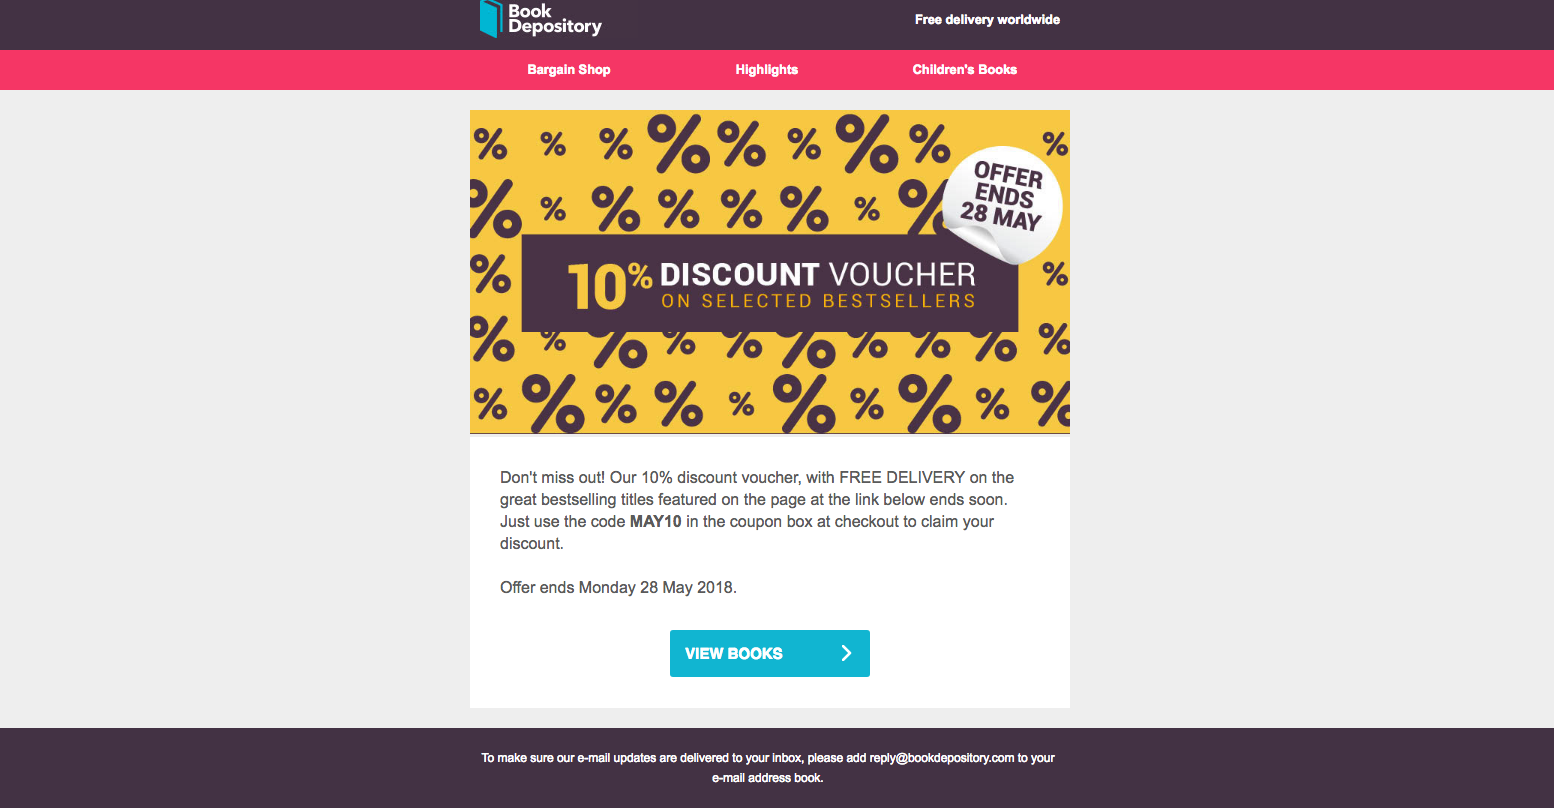 Automated email from Book Depository